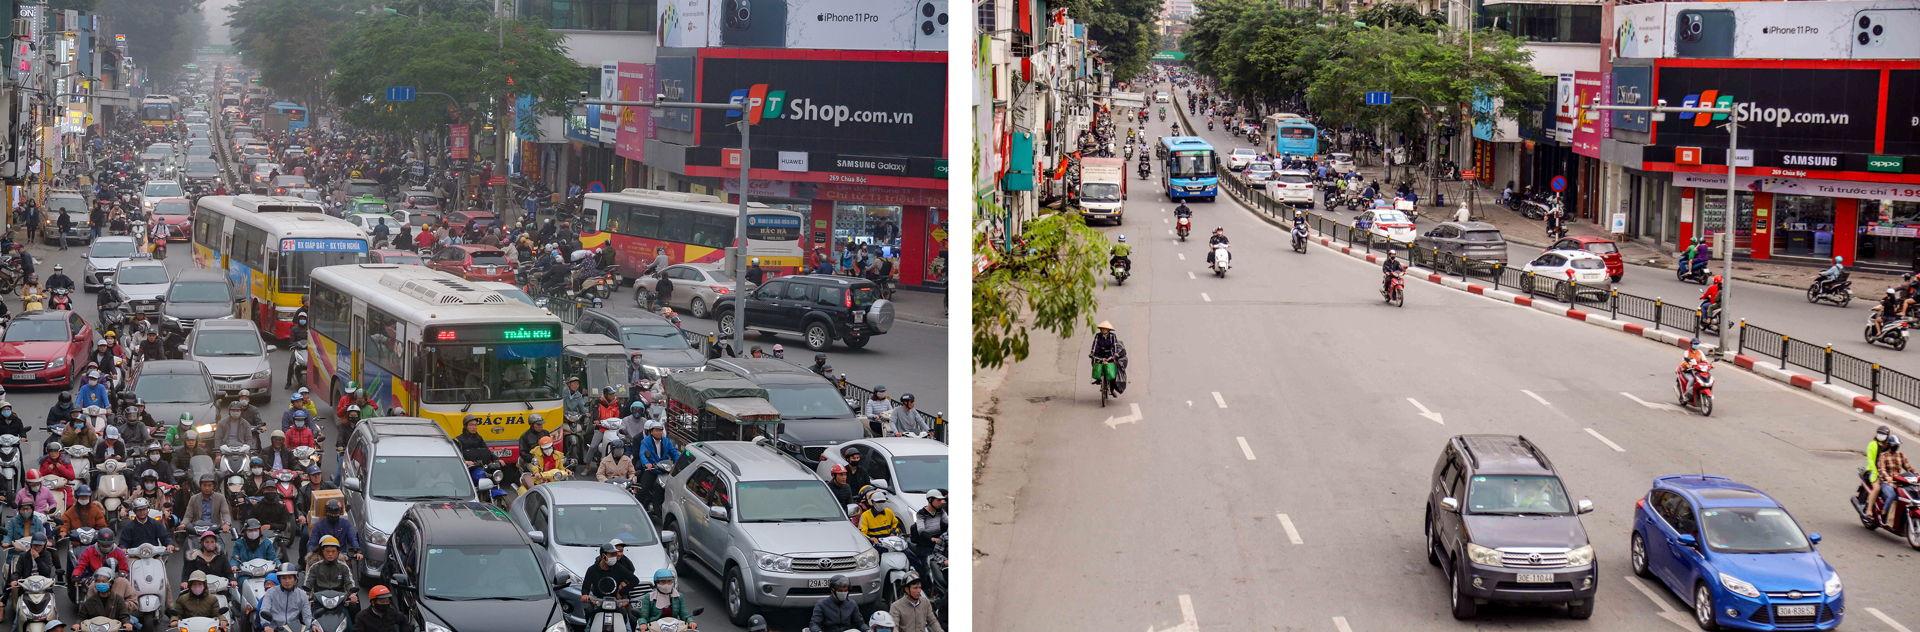 Traffic congestion (left) that was common at Chua Boc-Thai Ha intersection in Hanoi, Vietnam is no longer an issue during the COVID-19 epidemic (right). Photos: Nam Tran / Tuoi Tre